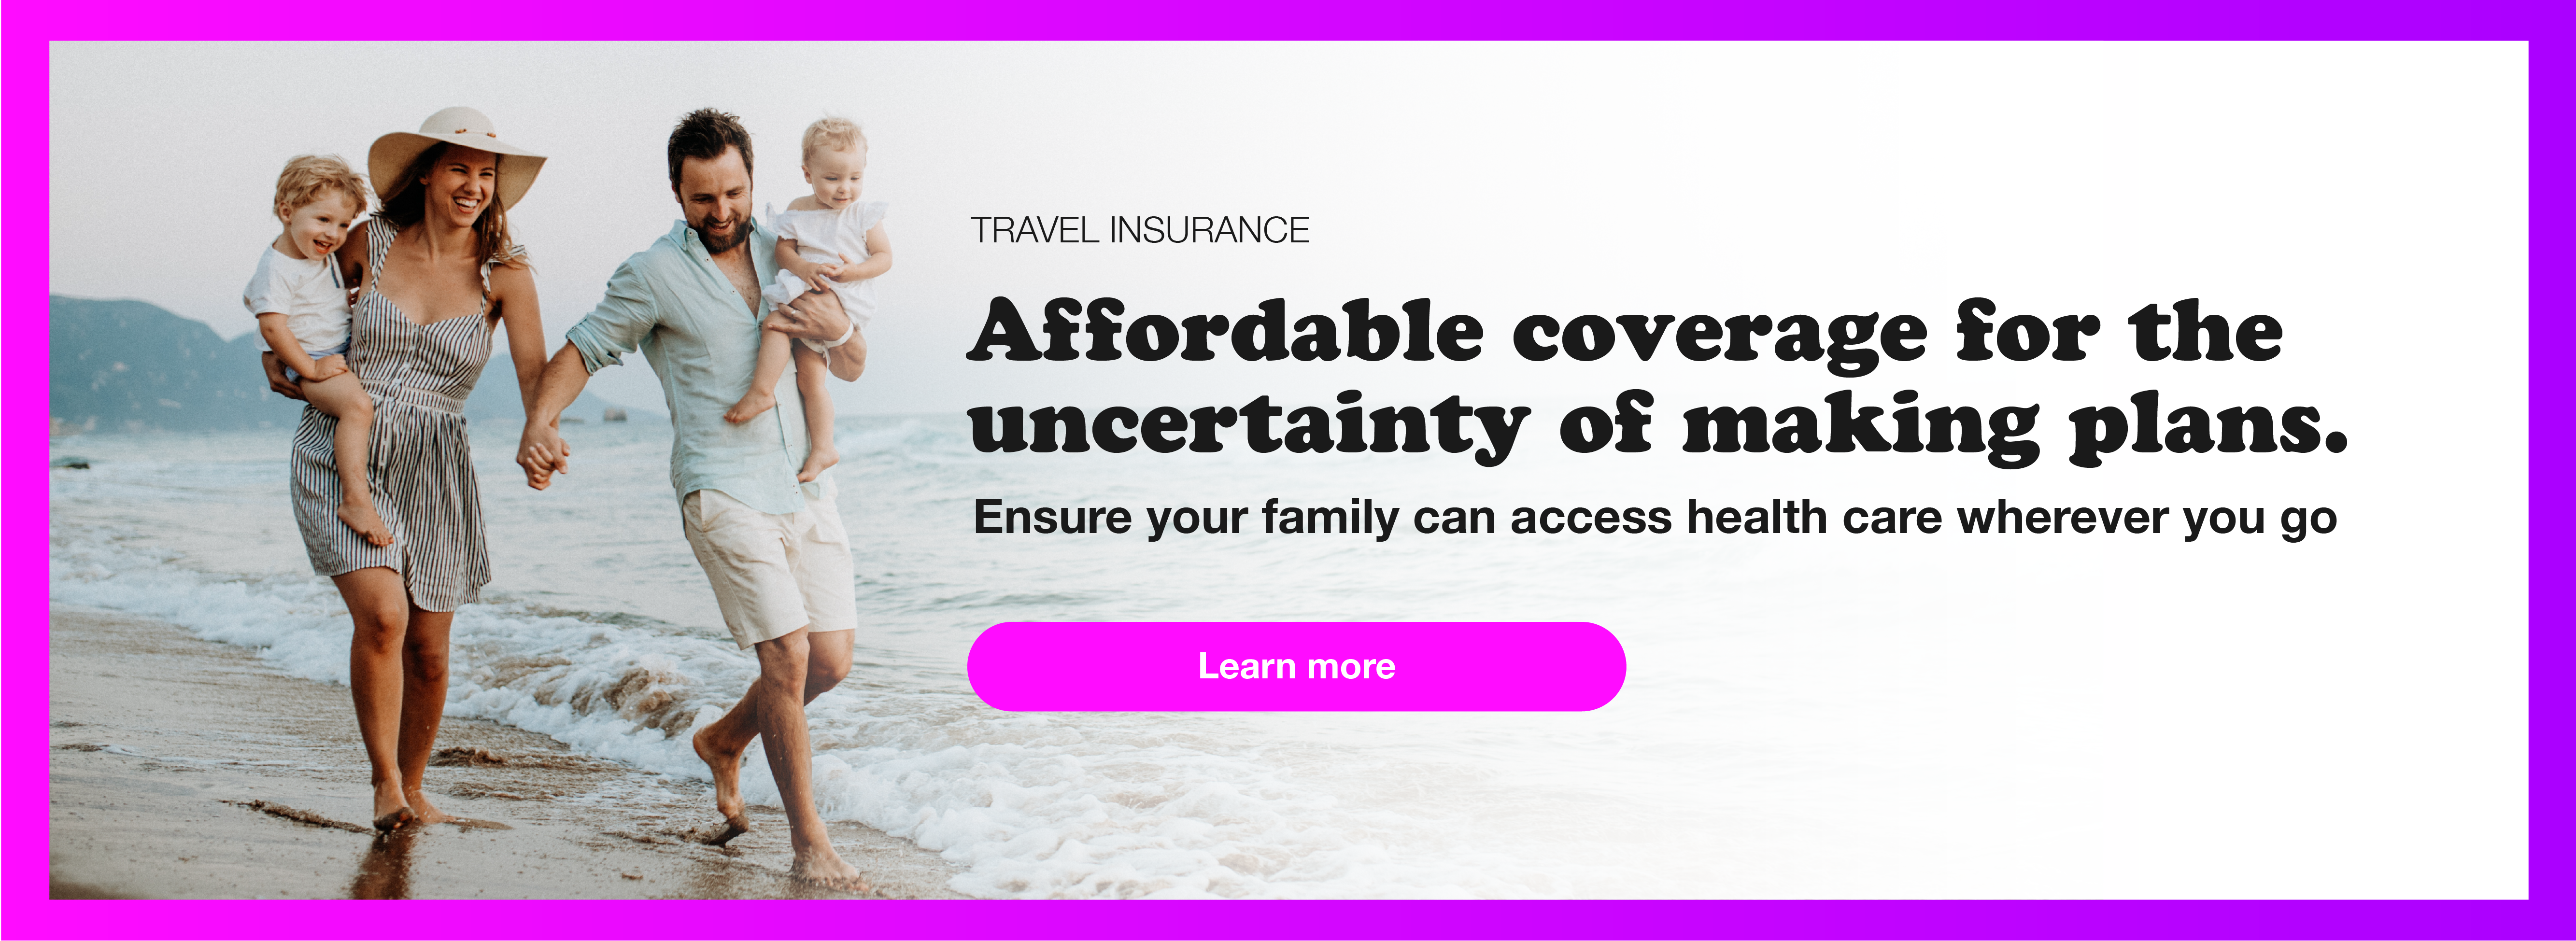 Travel Insurance: Affordable coverag for the uncertainty of making plans. Ensure your family can access health care wherever you go. Learn more